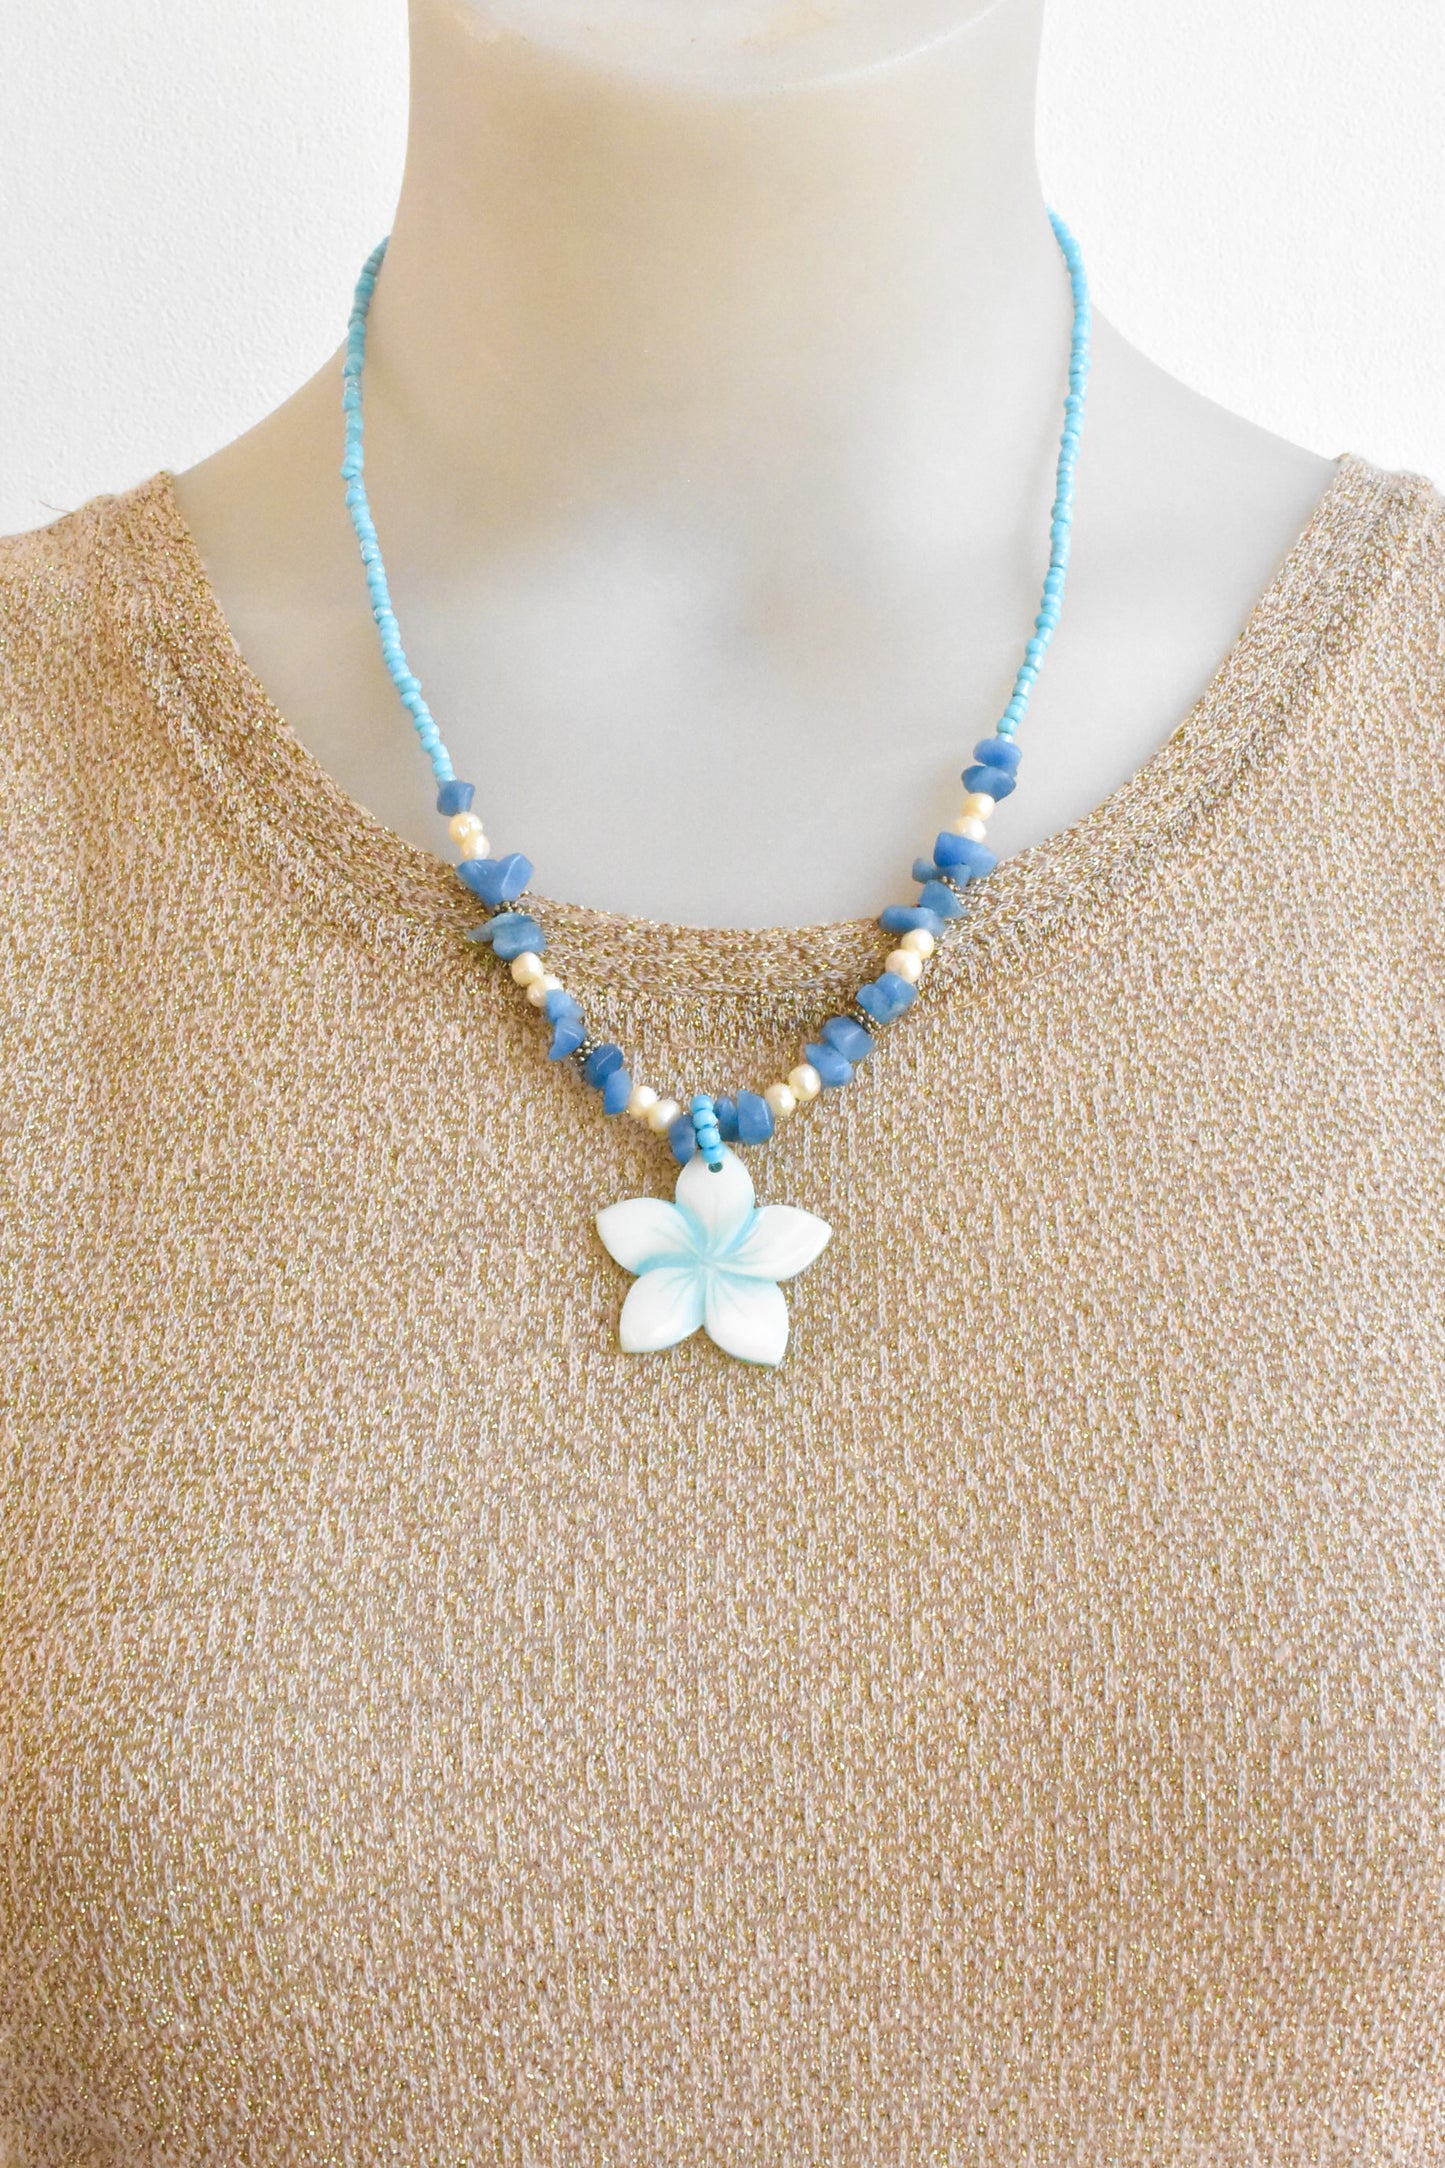 Flower pendant necklace with pearls, shell and blue gemstones